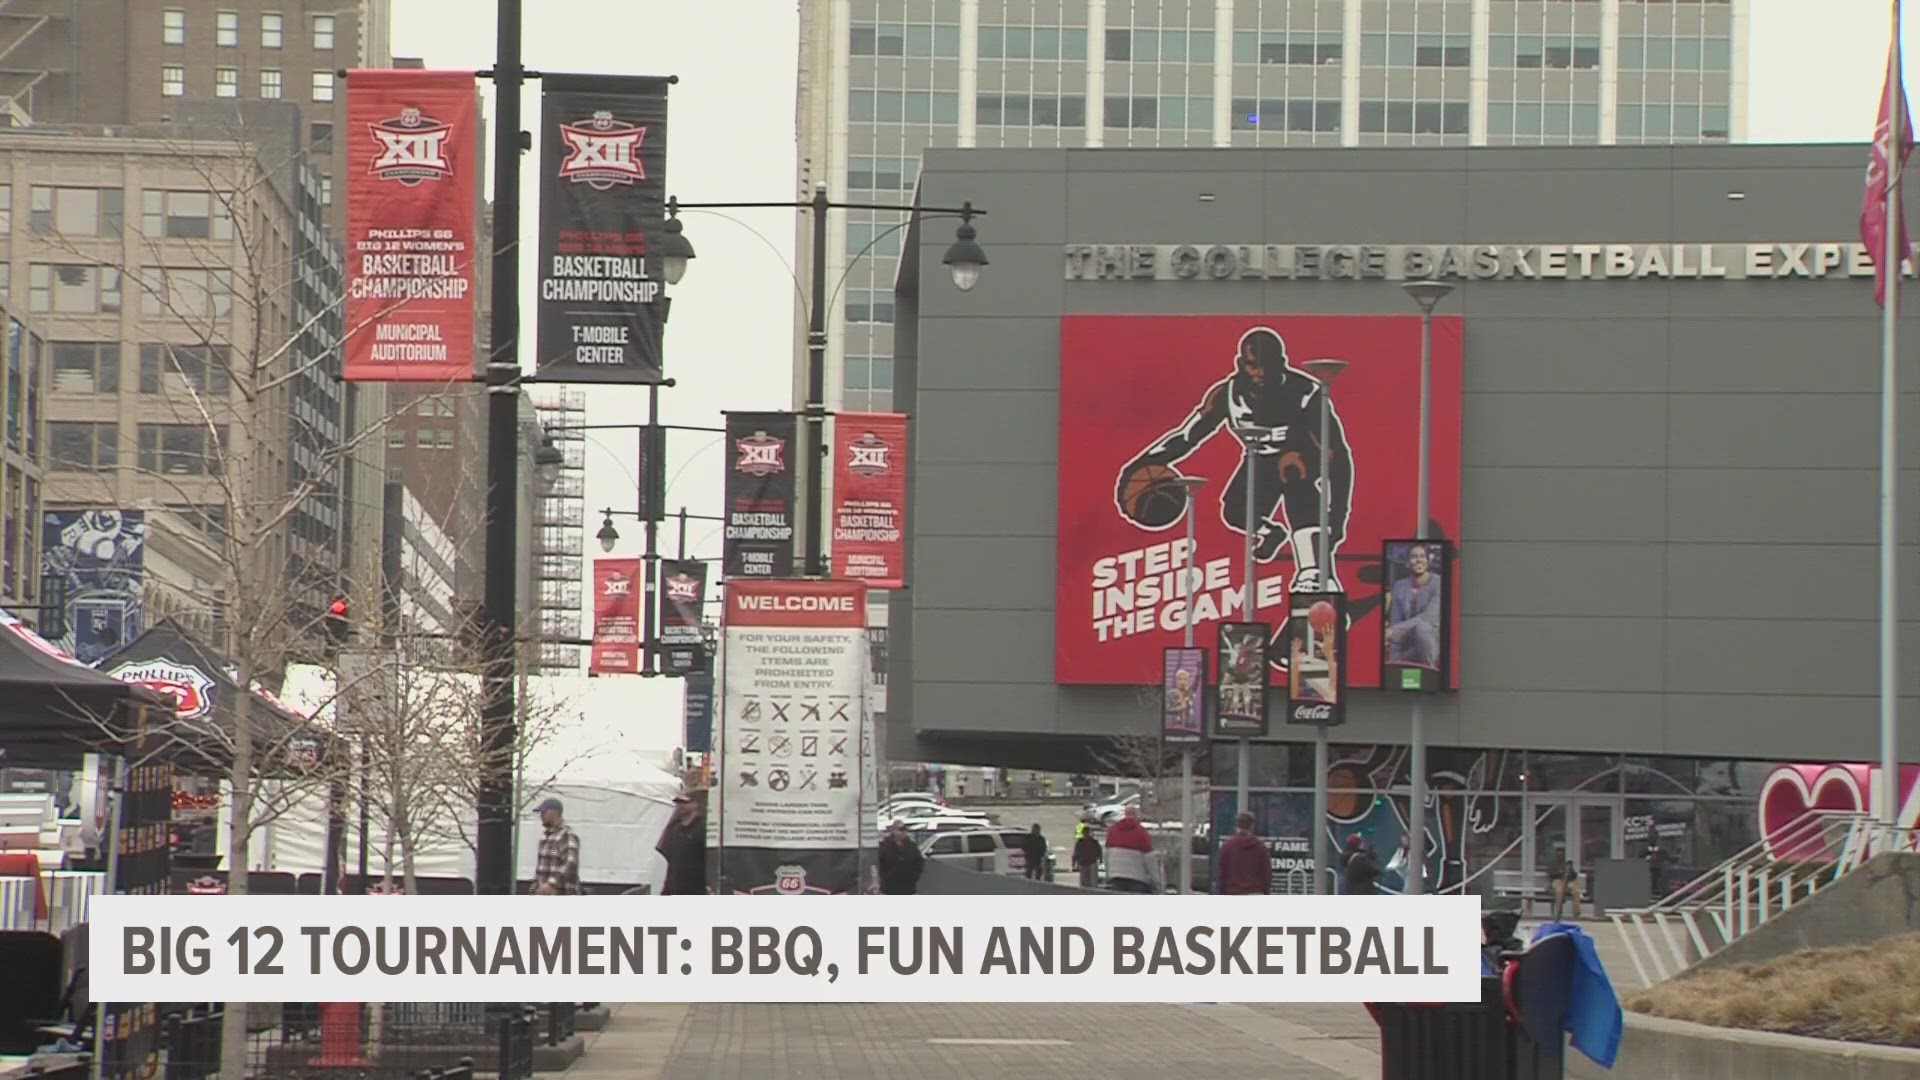 While the basketball games are the main attractions at the Big 12 tournament, fans say the activities outside the arena contribute to a one-of-a-kind experience.